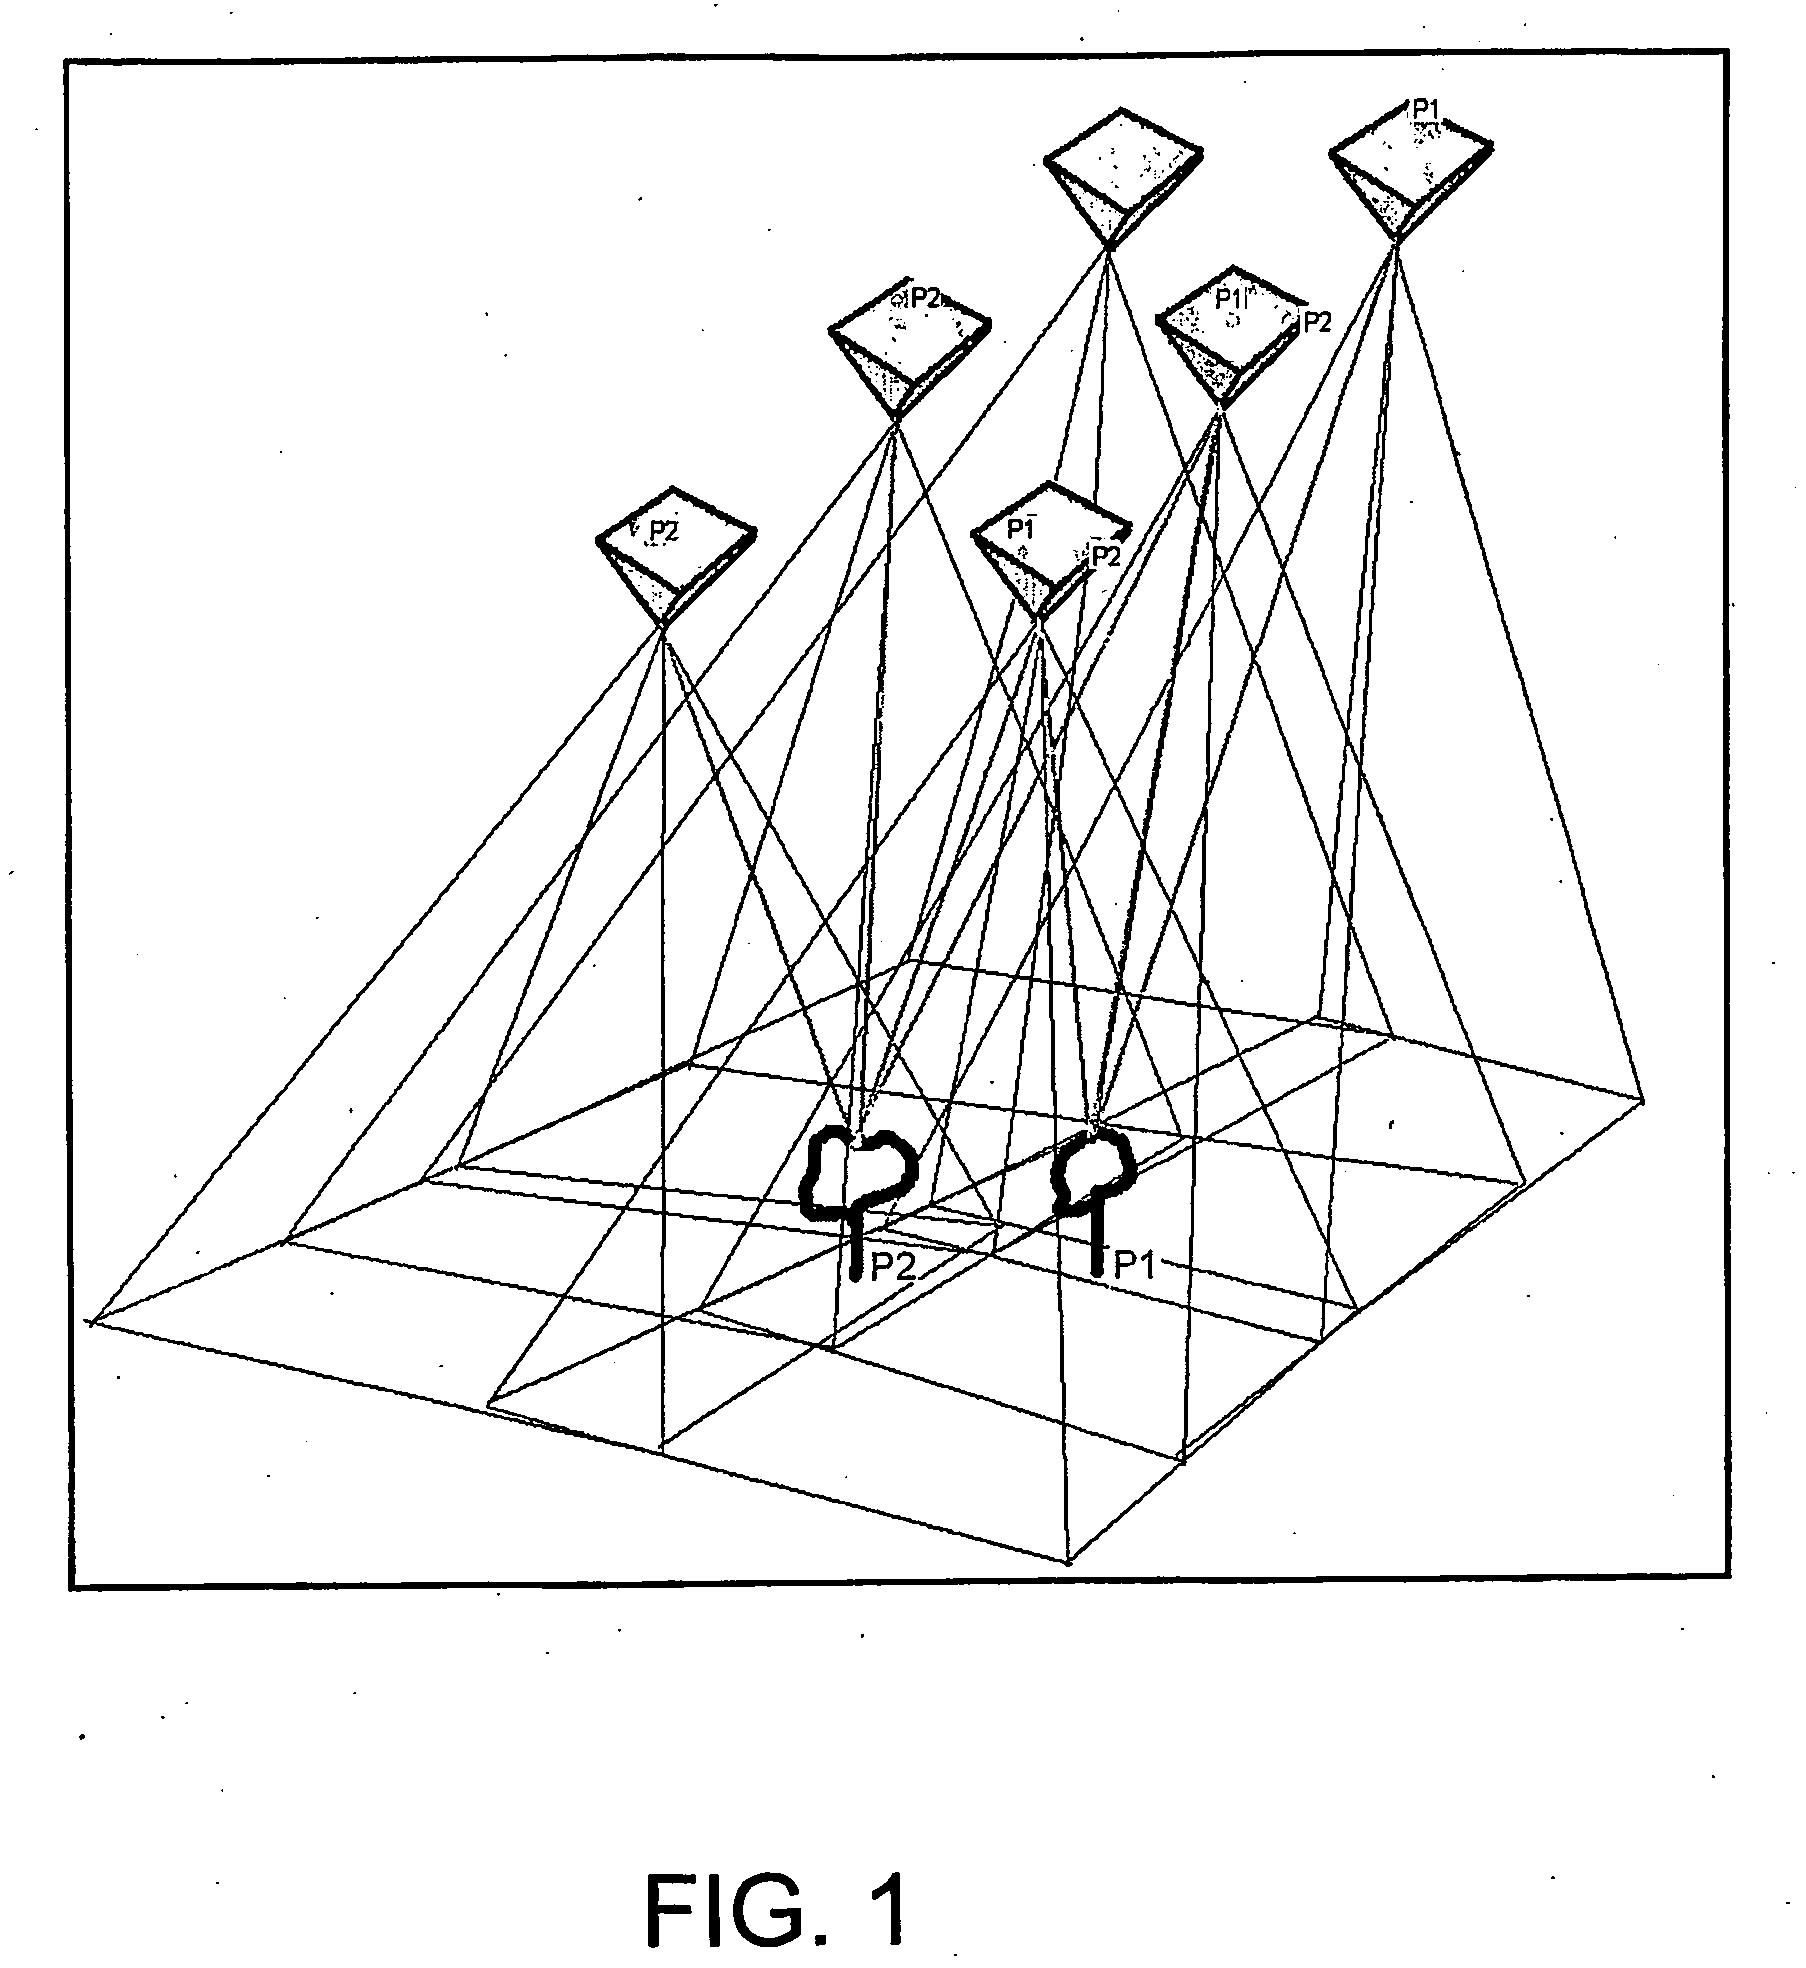 Method for Determination of Stand Attributes and a Computer Program for Performing the Method